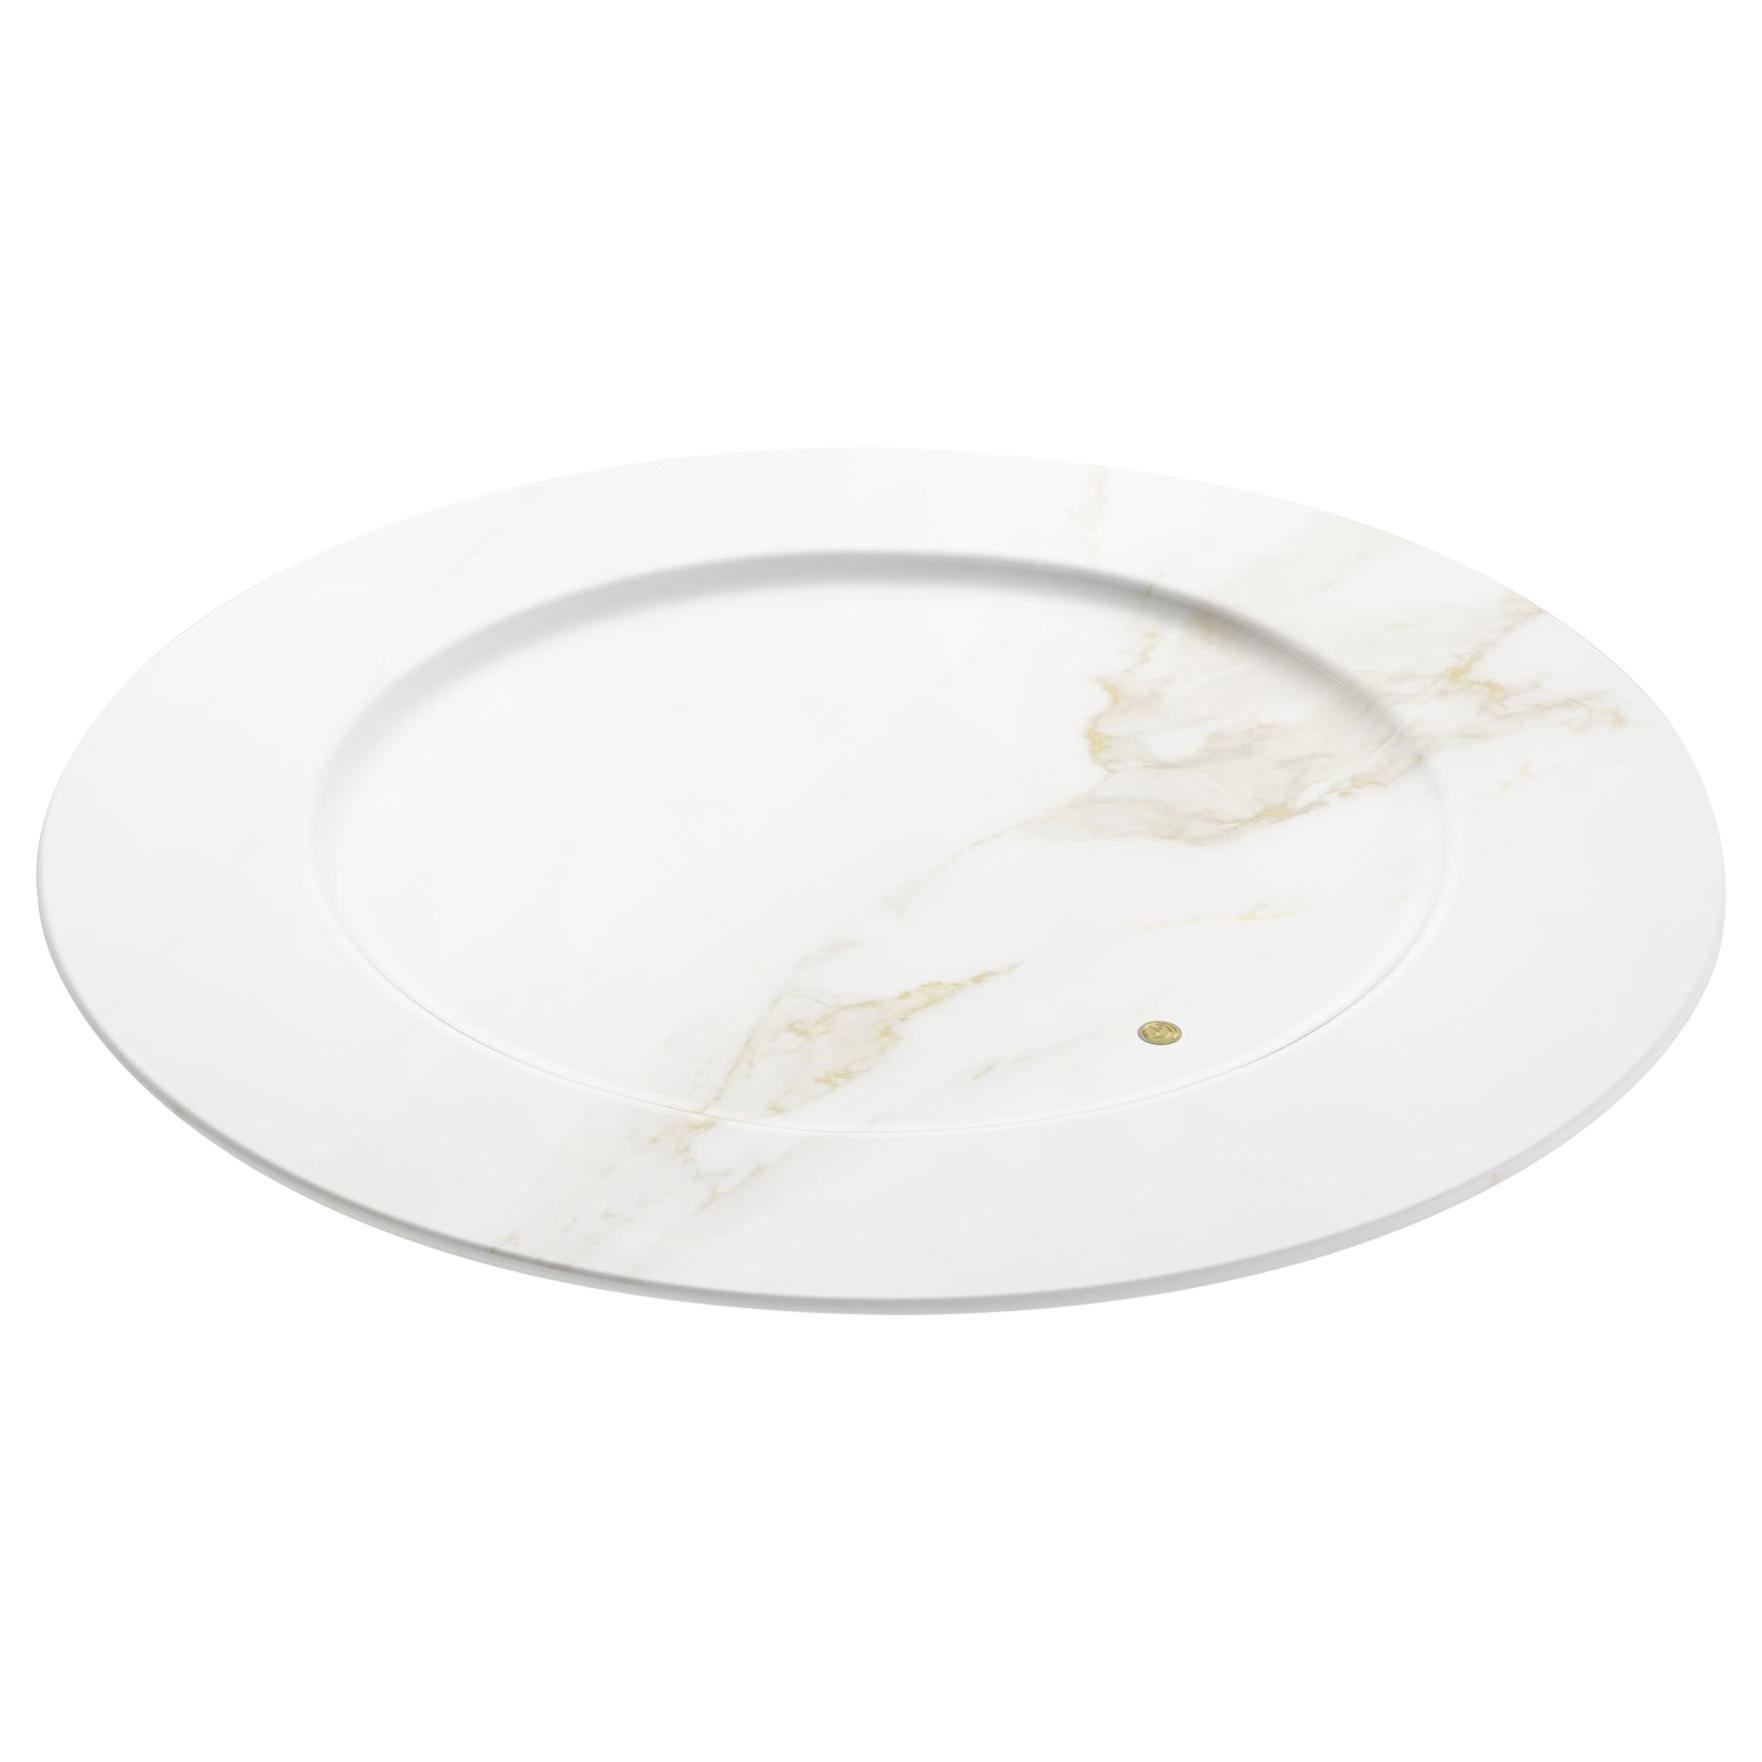 Charger Plate Platters Serveware White Calacatta Marble Collectible Design Italy For Sale